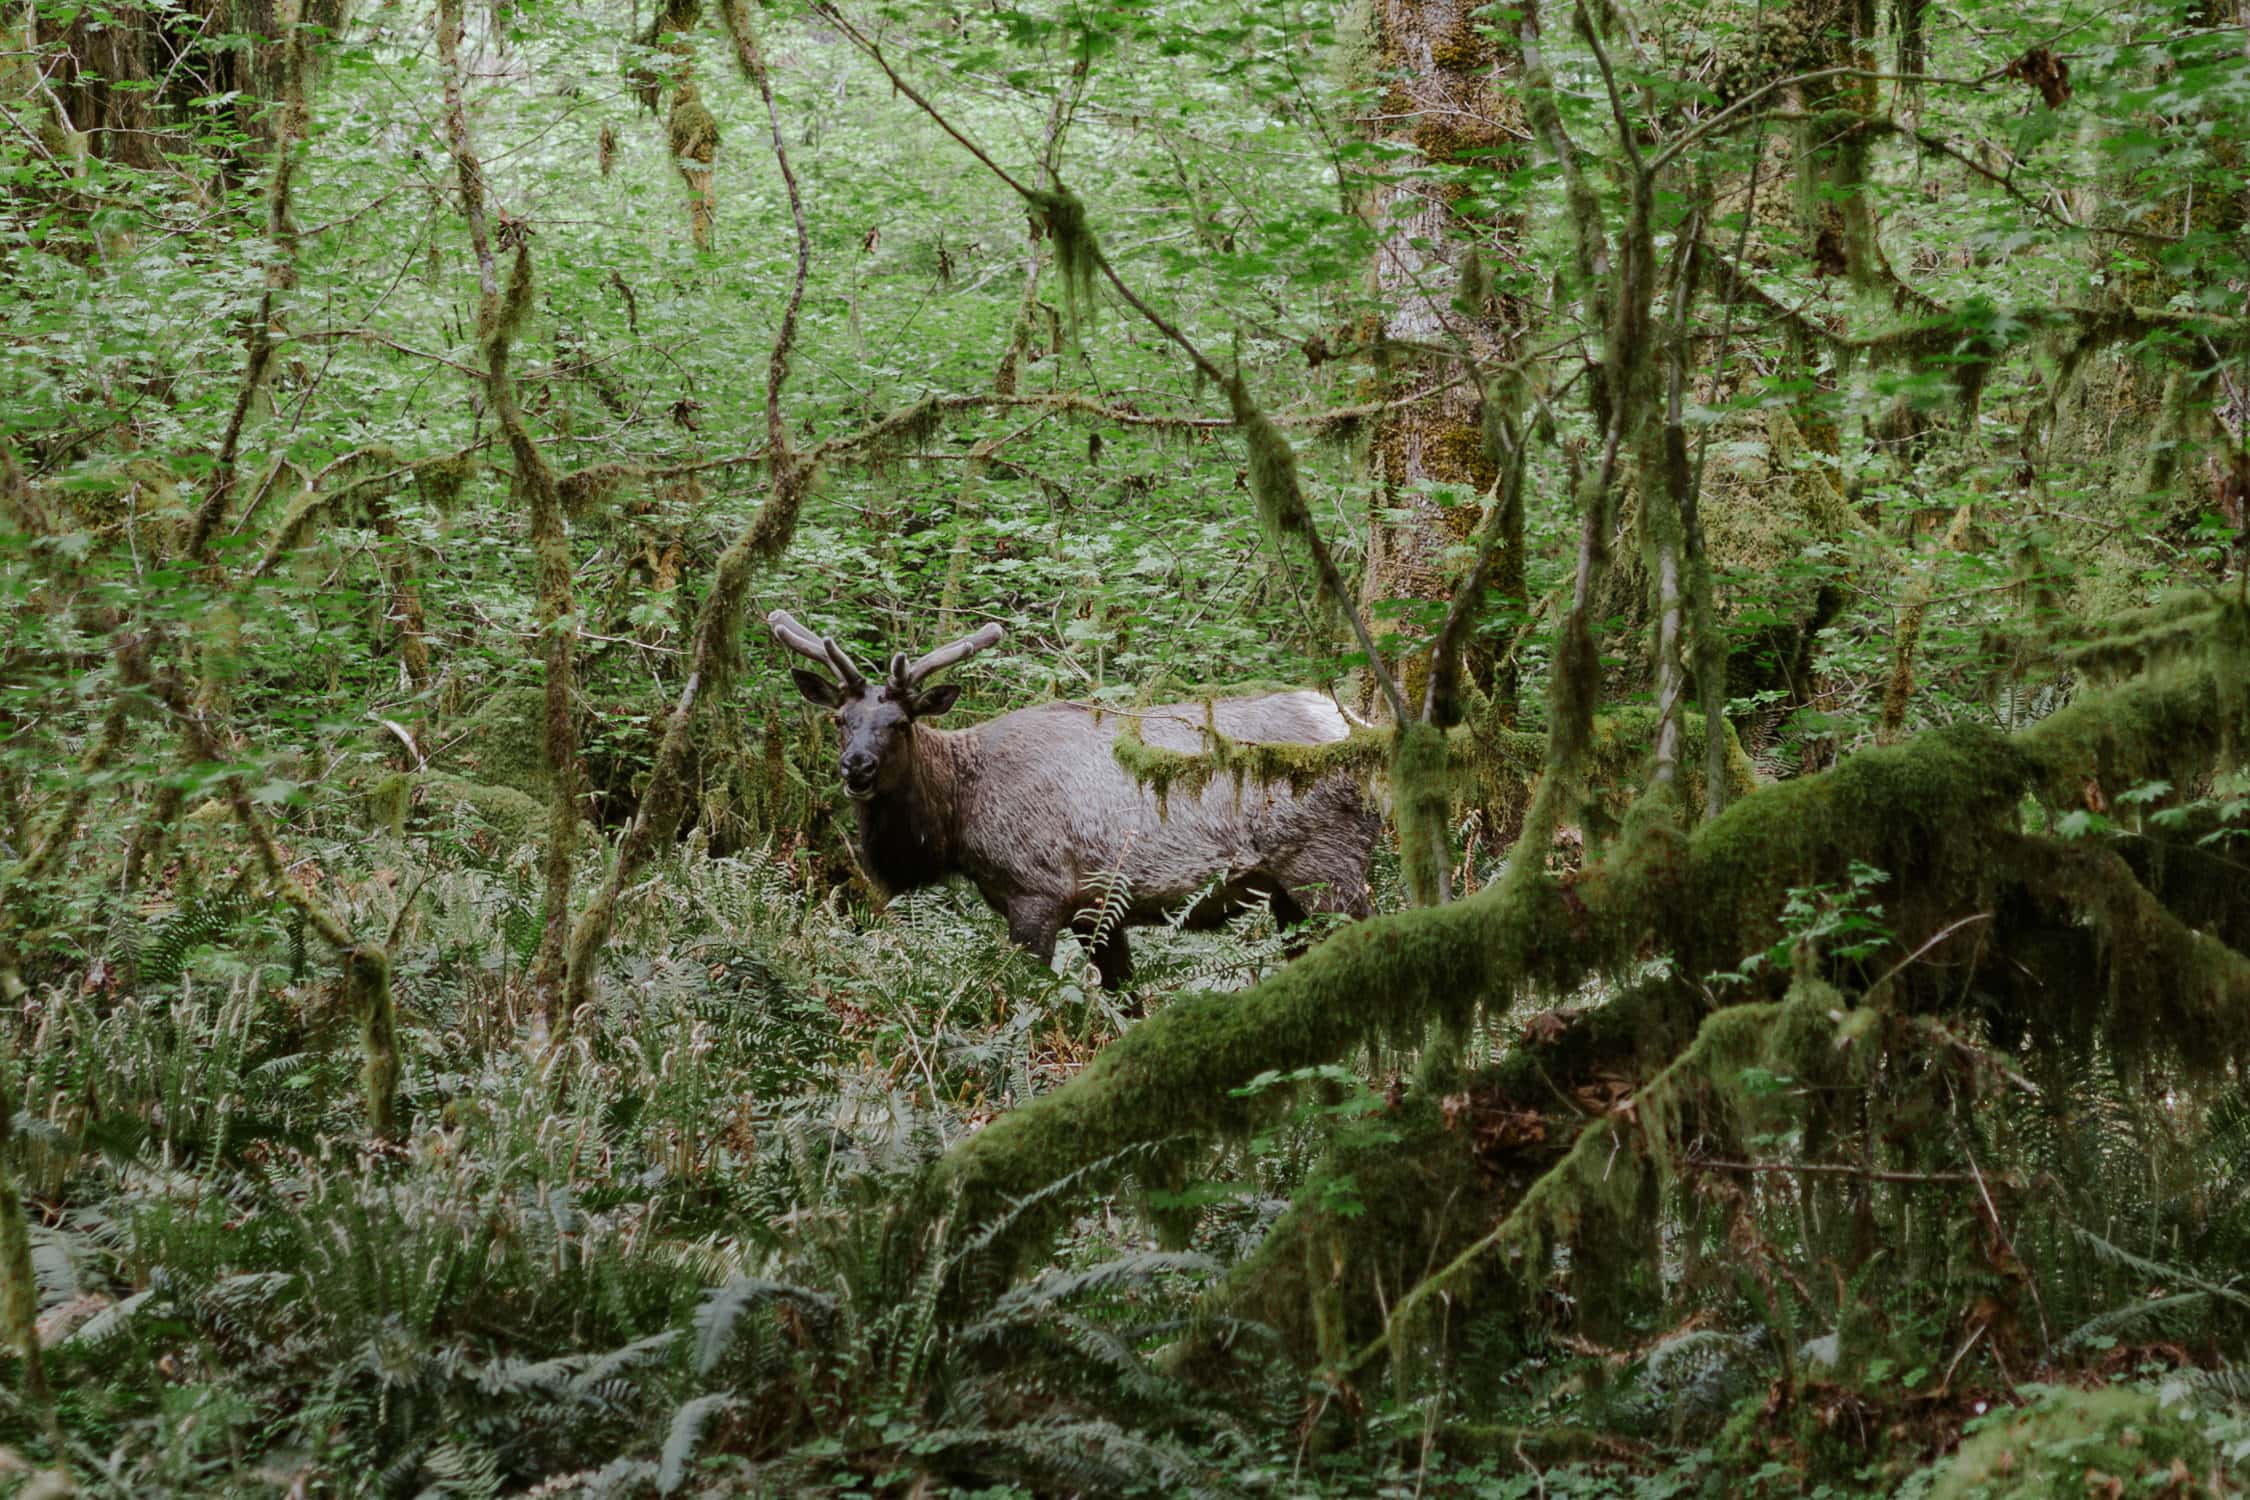 An elk in the Hoh Rainforest in Olympic National Park.